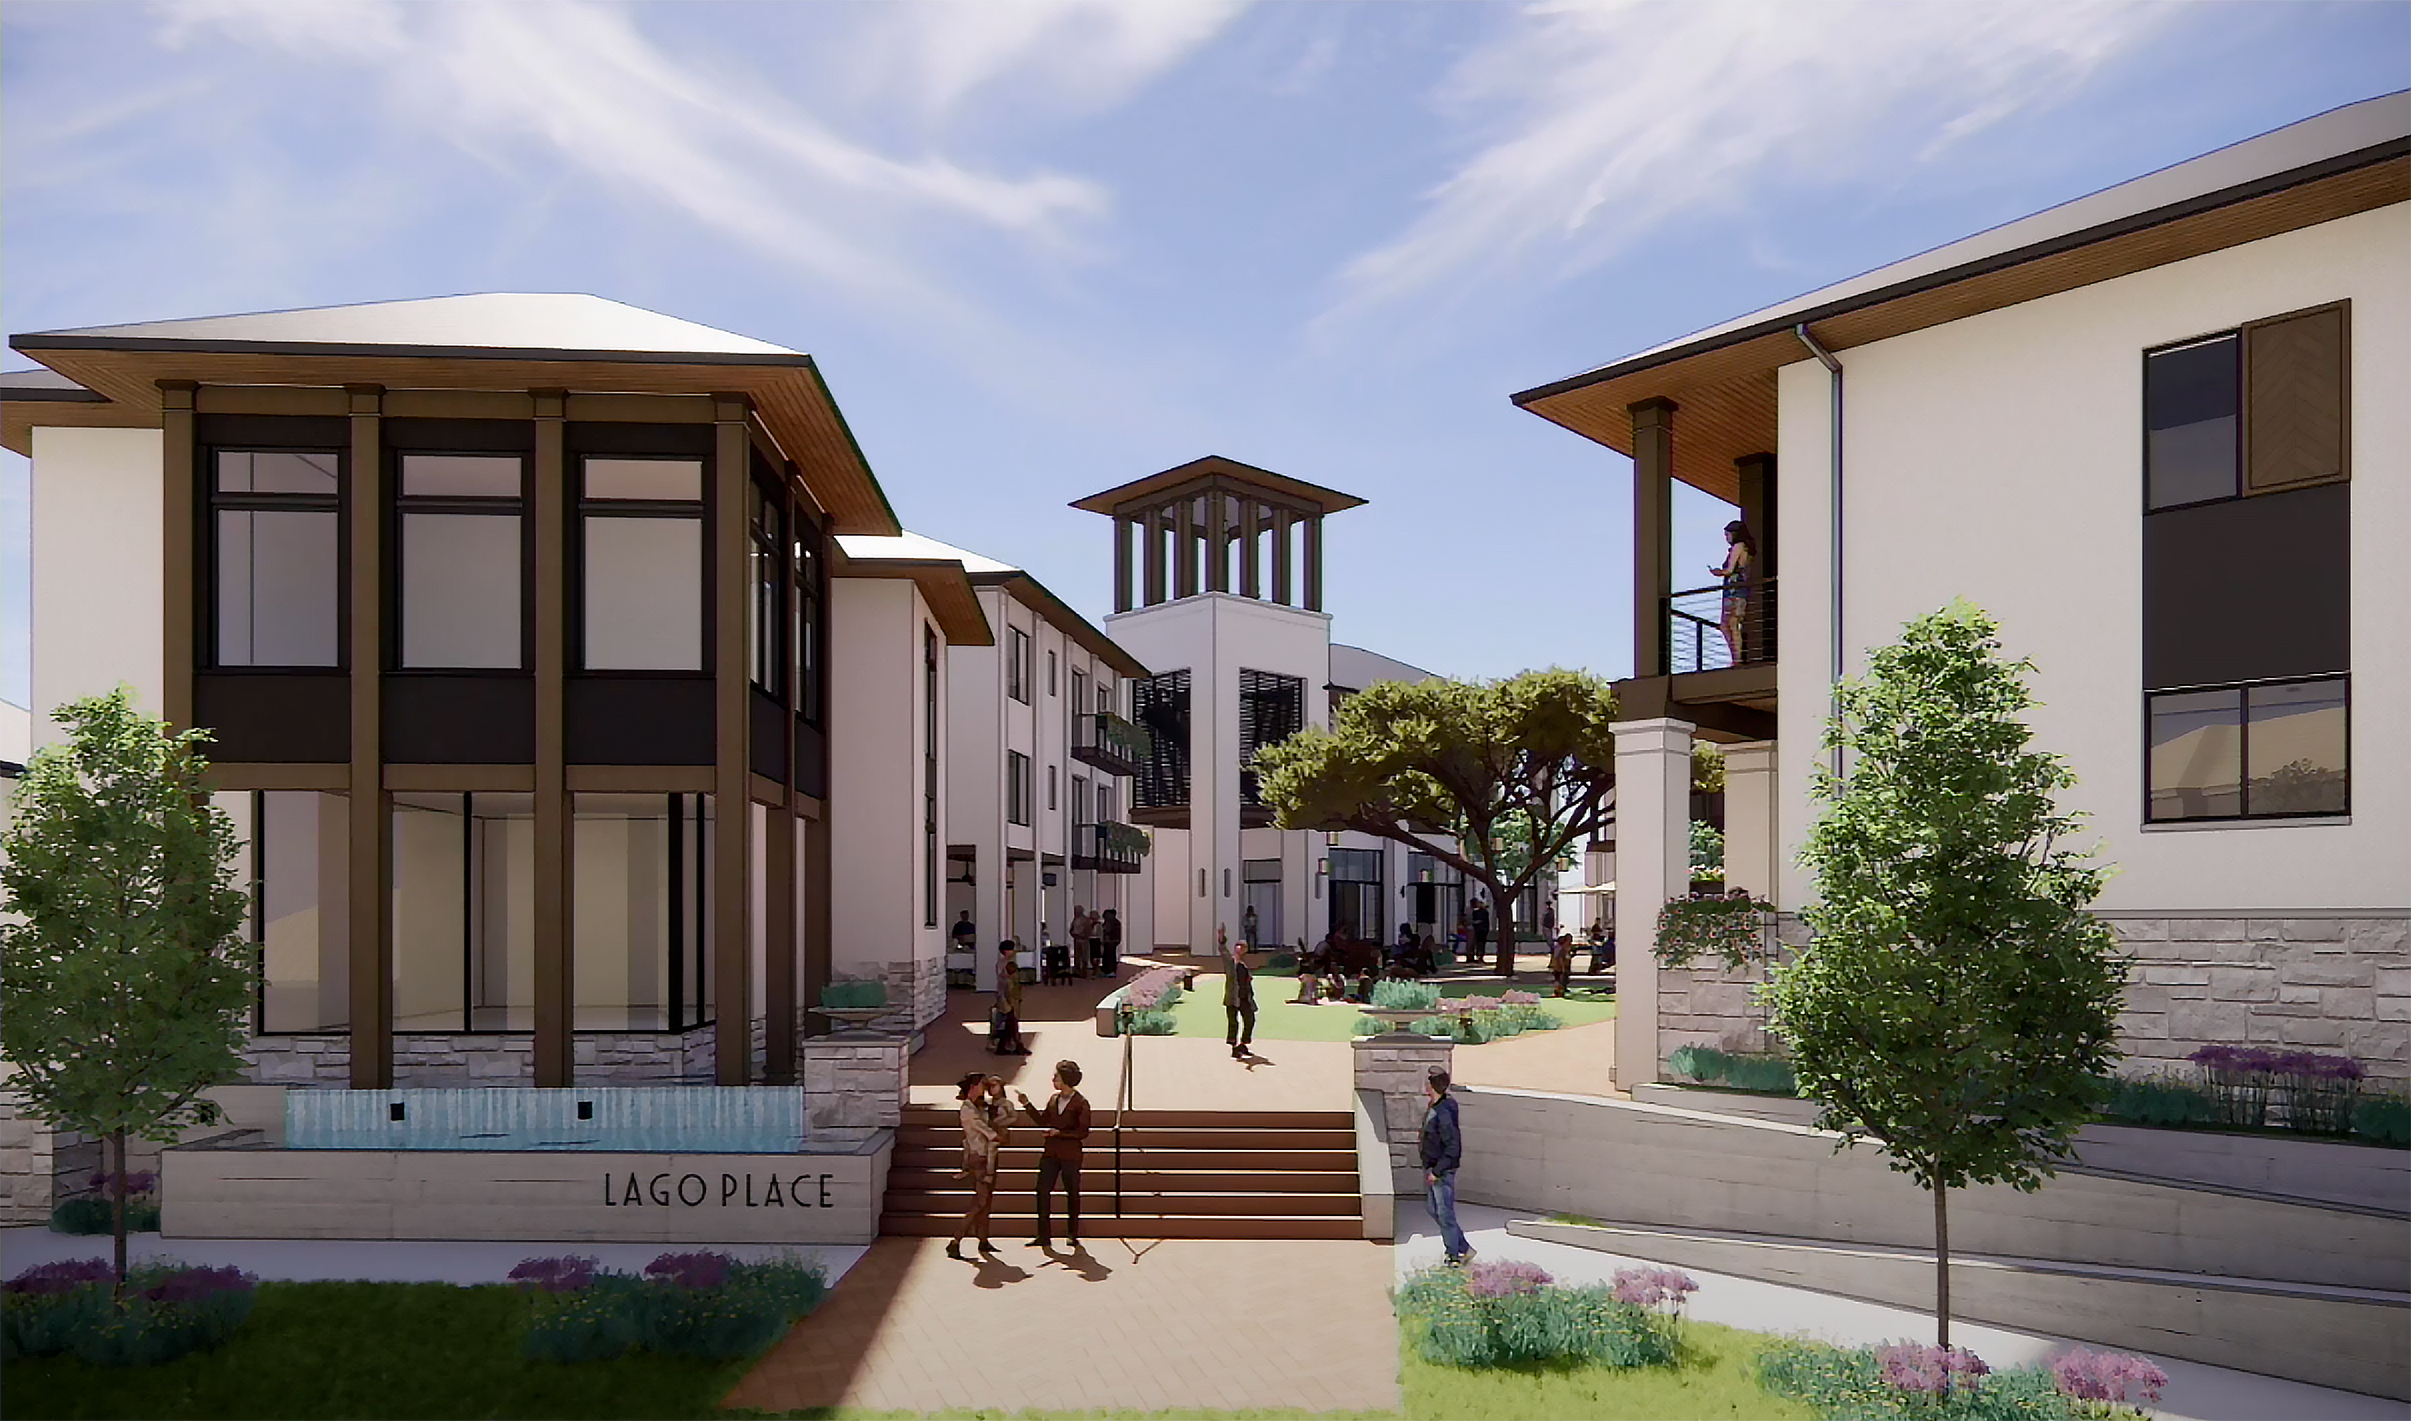 Early render of mixed-use community Lago Place by Younger Homes and Digibilt